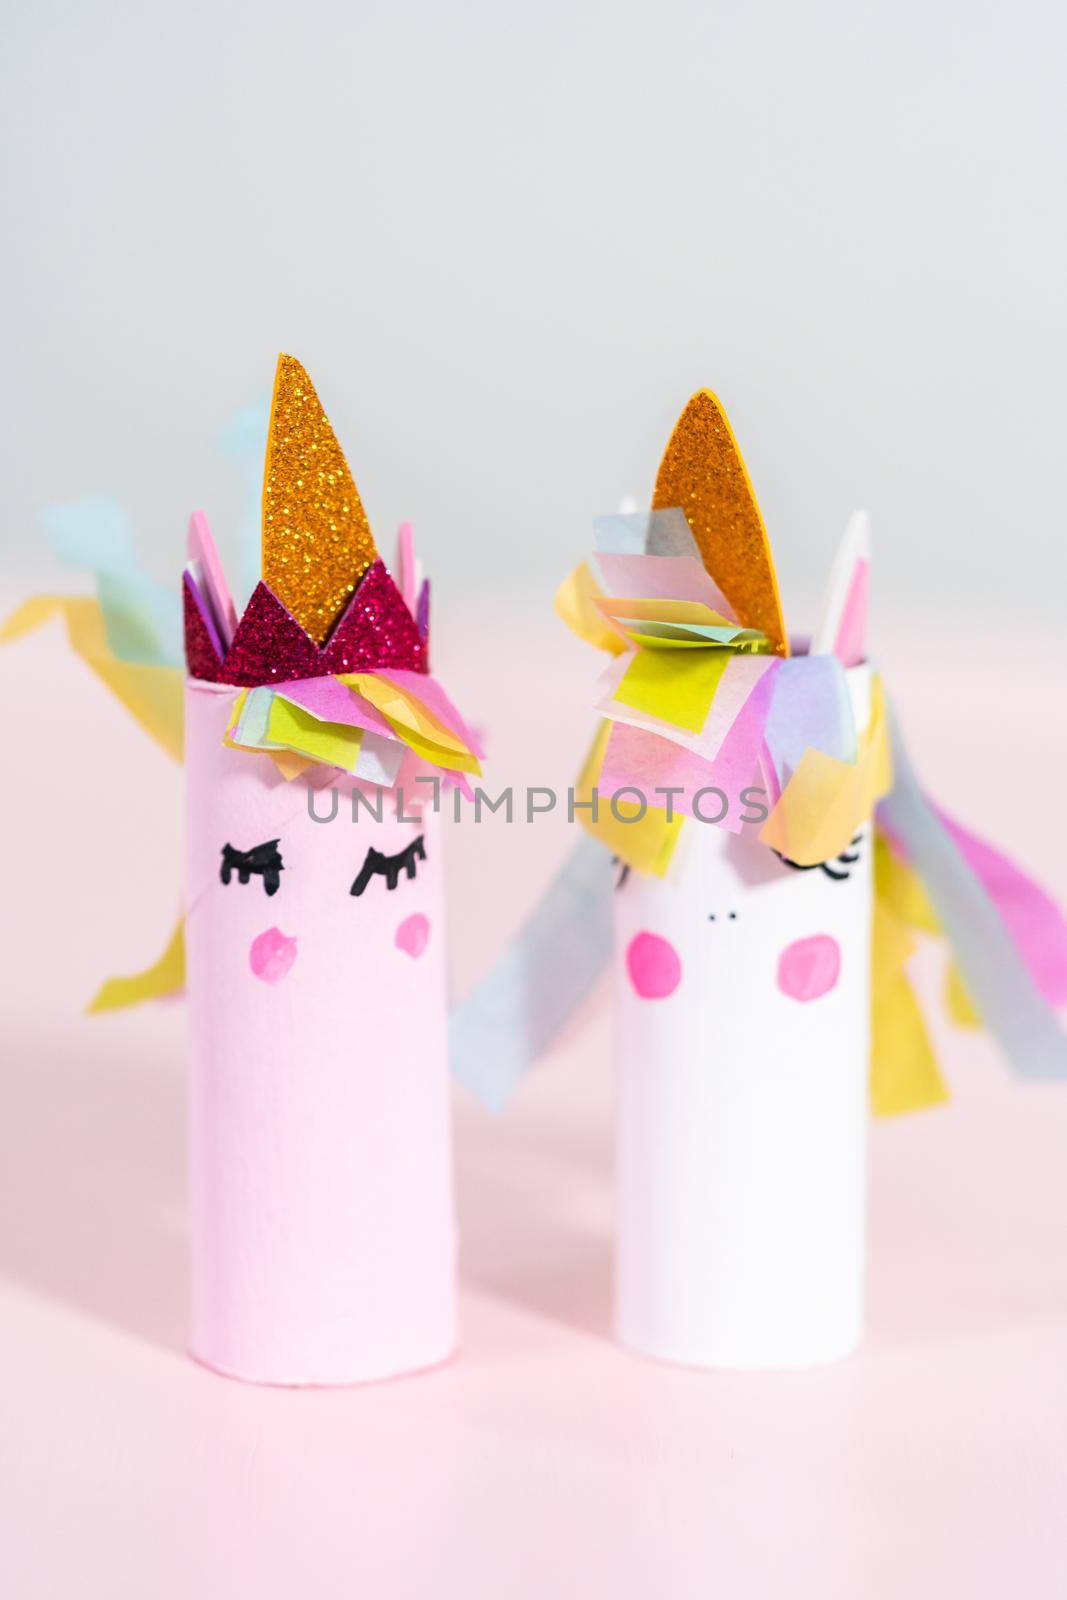 Making a unicorn out of the toilet paper roll and craft paper.